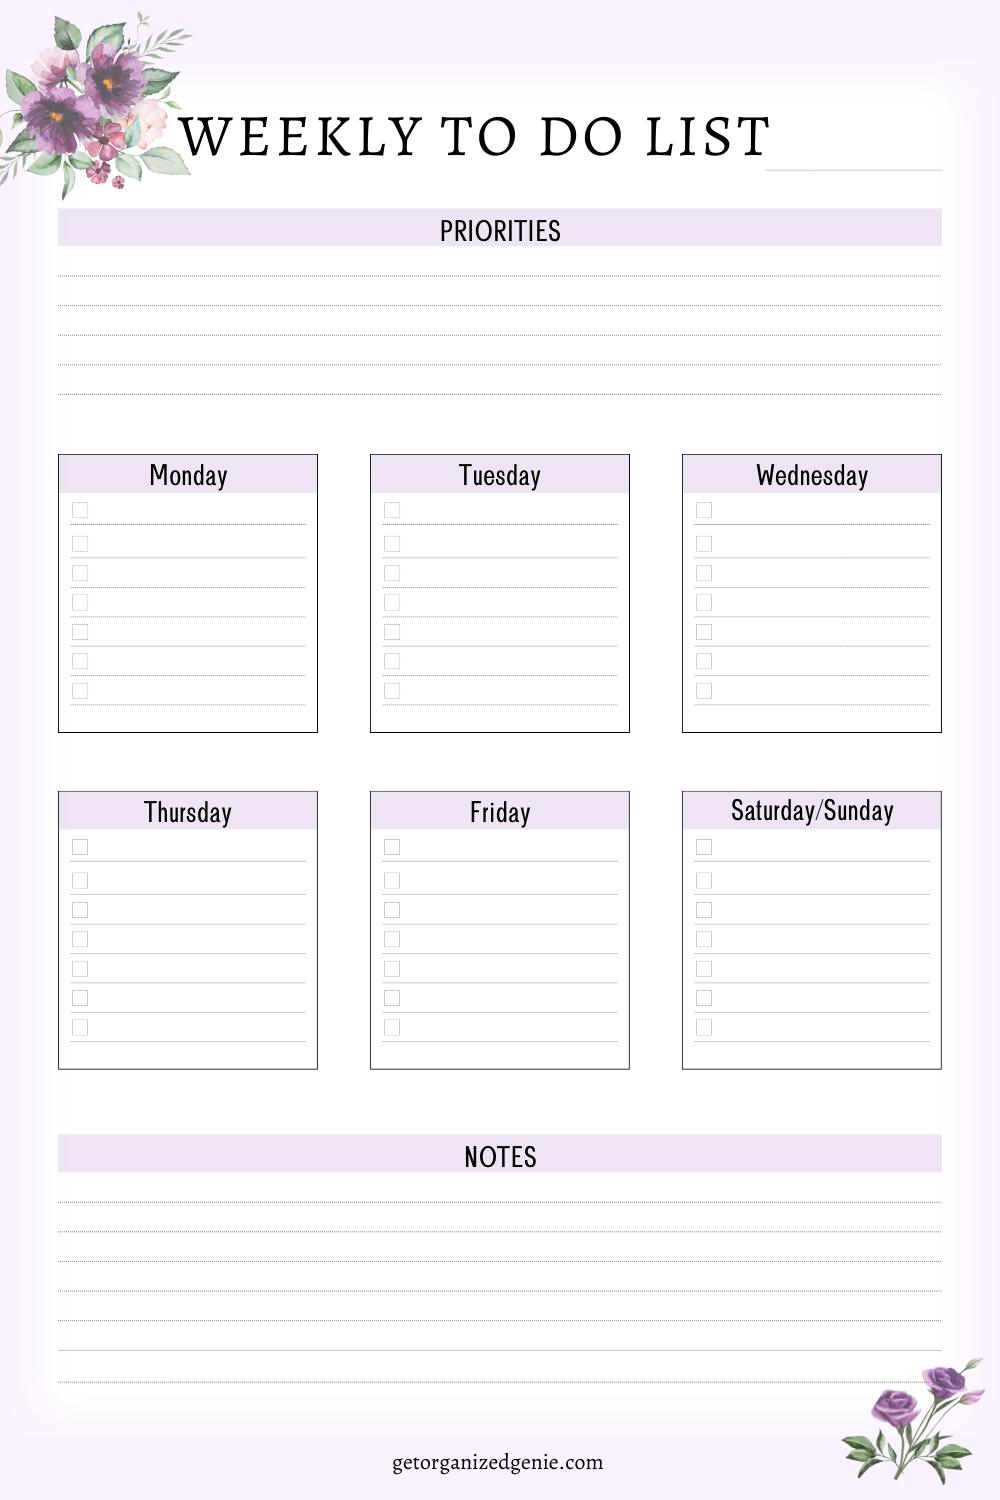 weekly-to-do-list-template-how-to-make-a-weekly-to-do-list